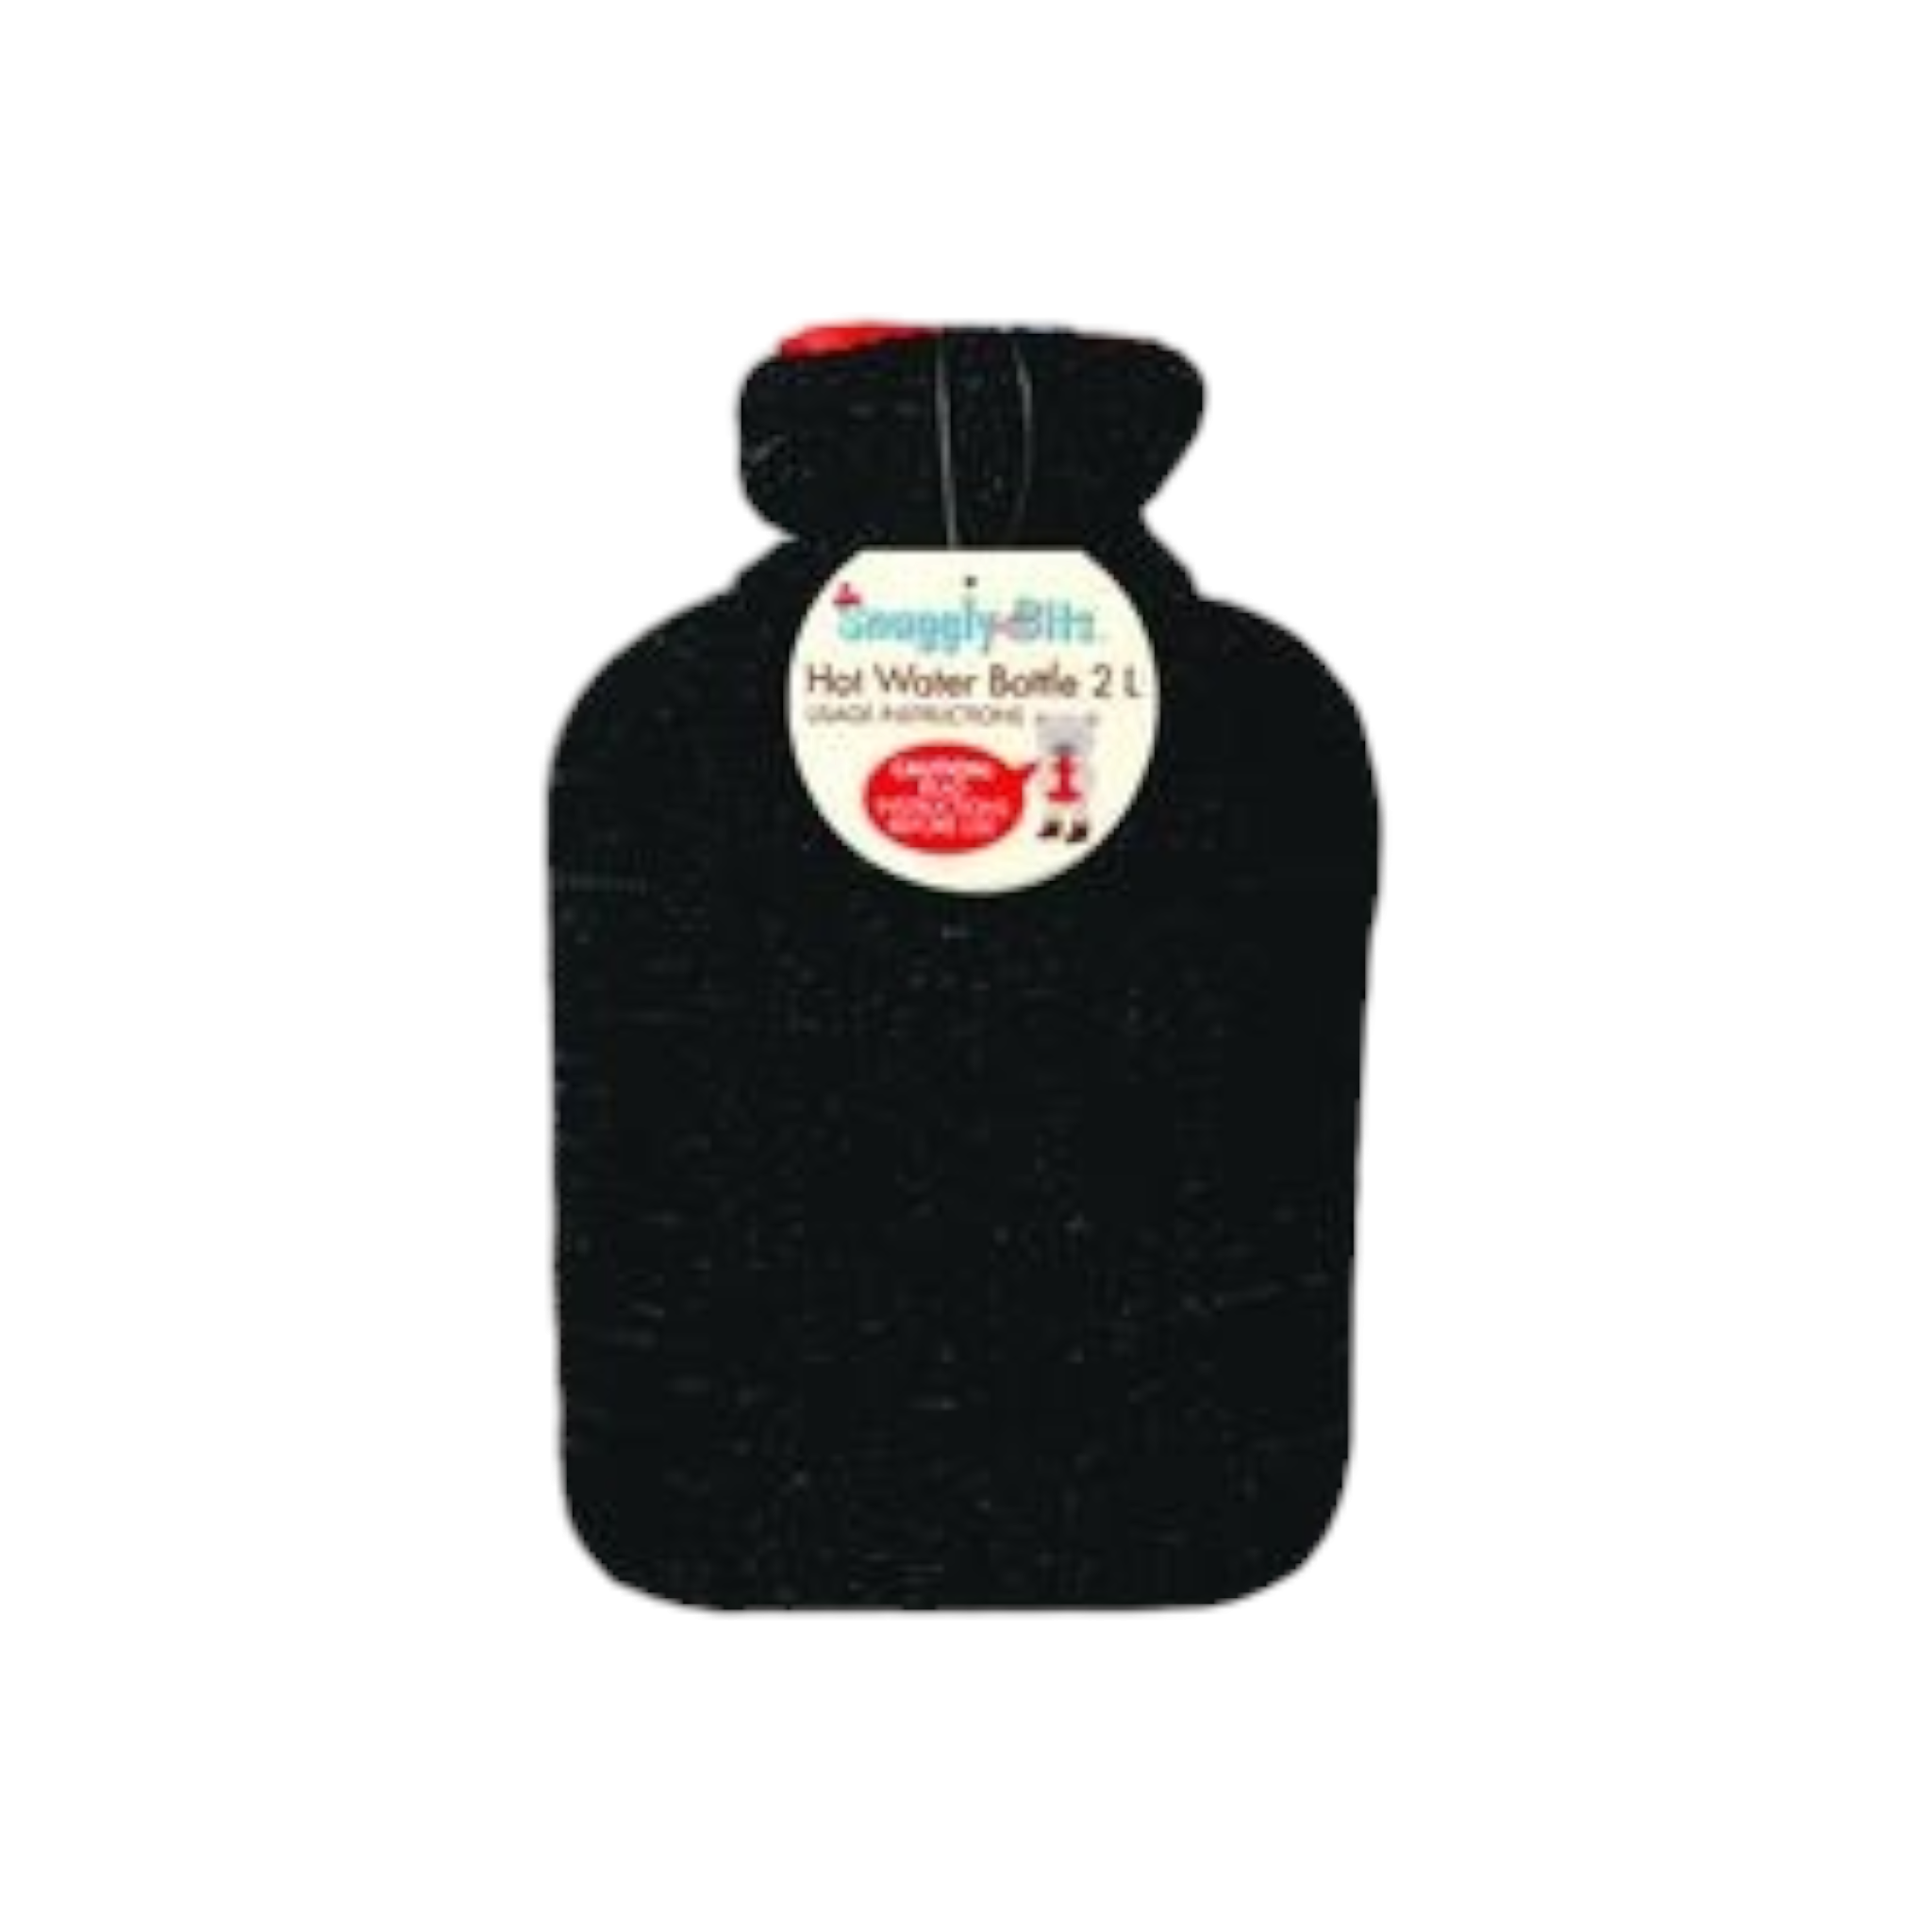 Hot Water Bottle with Knitted Cover 2L